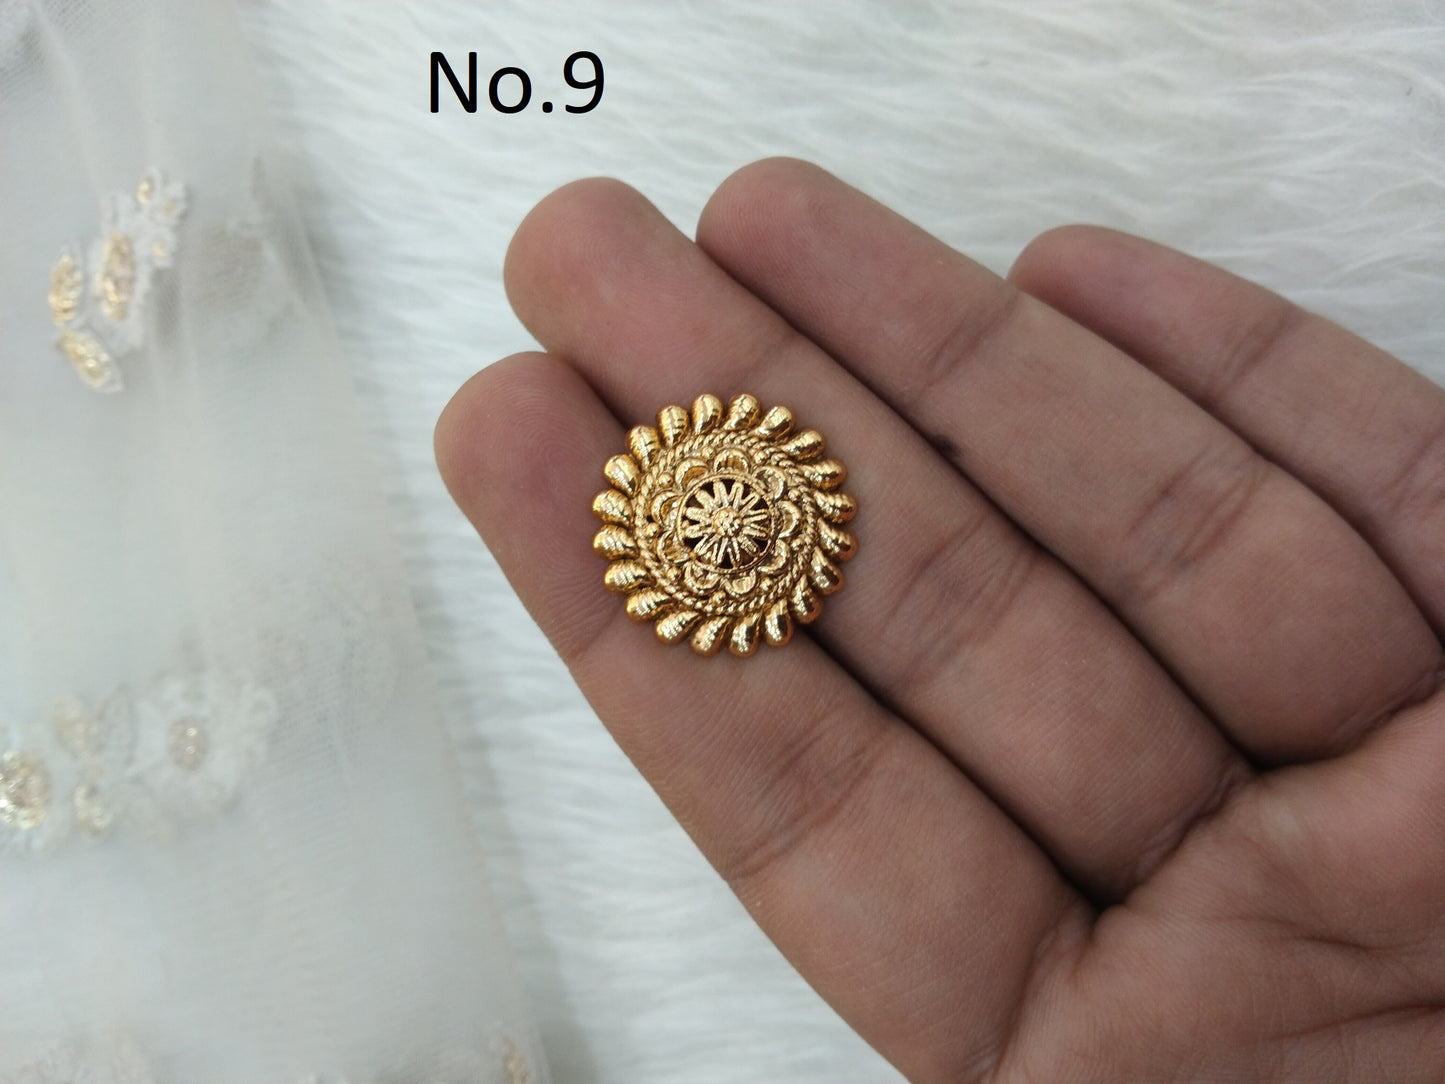 Indian Ring /Adjustable gold finish Finger rings round bridal cocktail ring delvi hand accessory